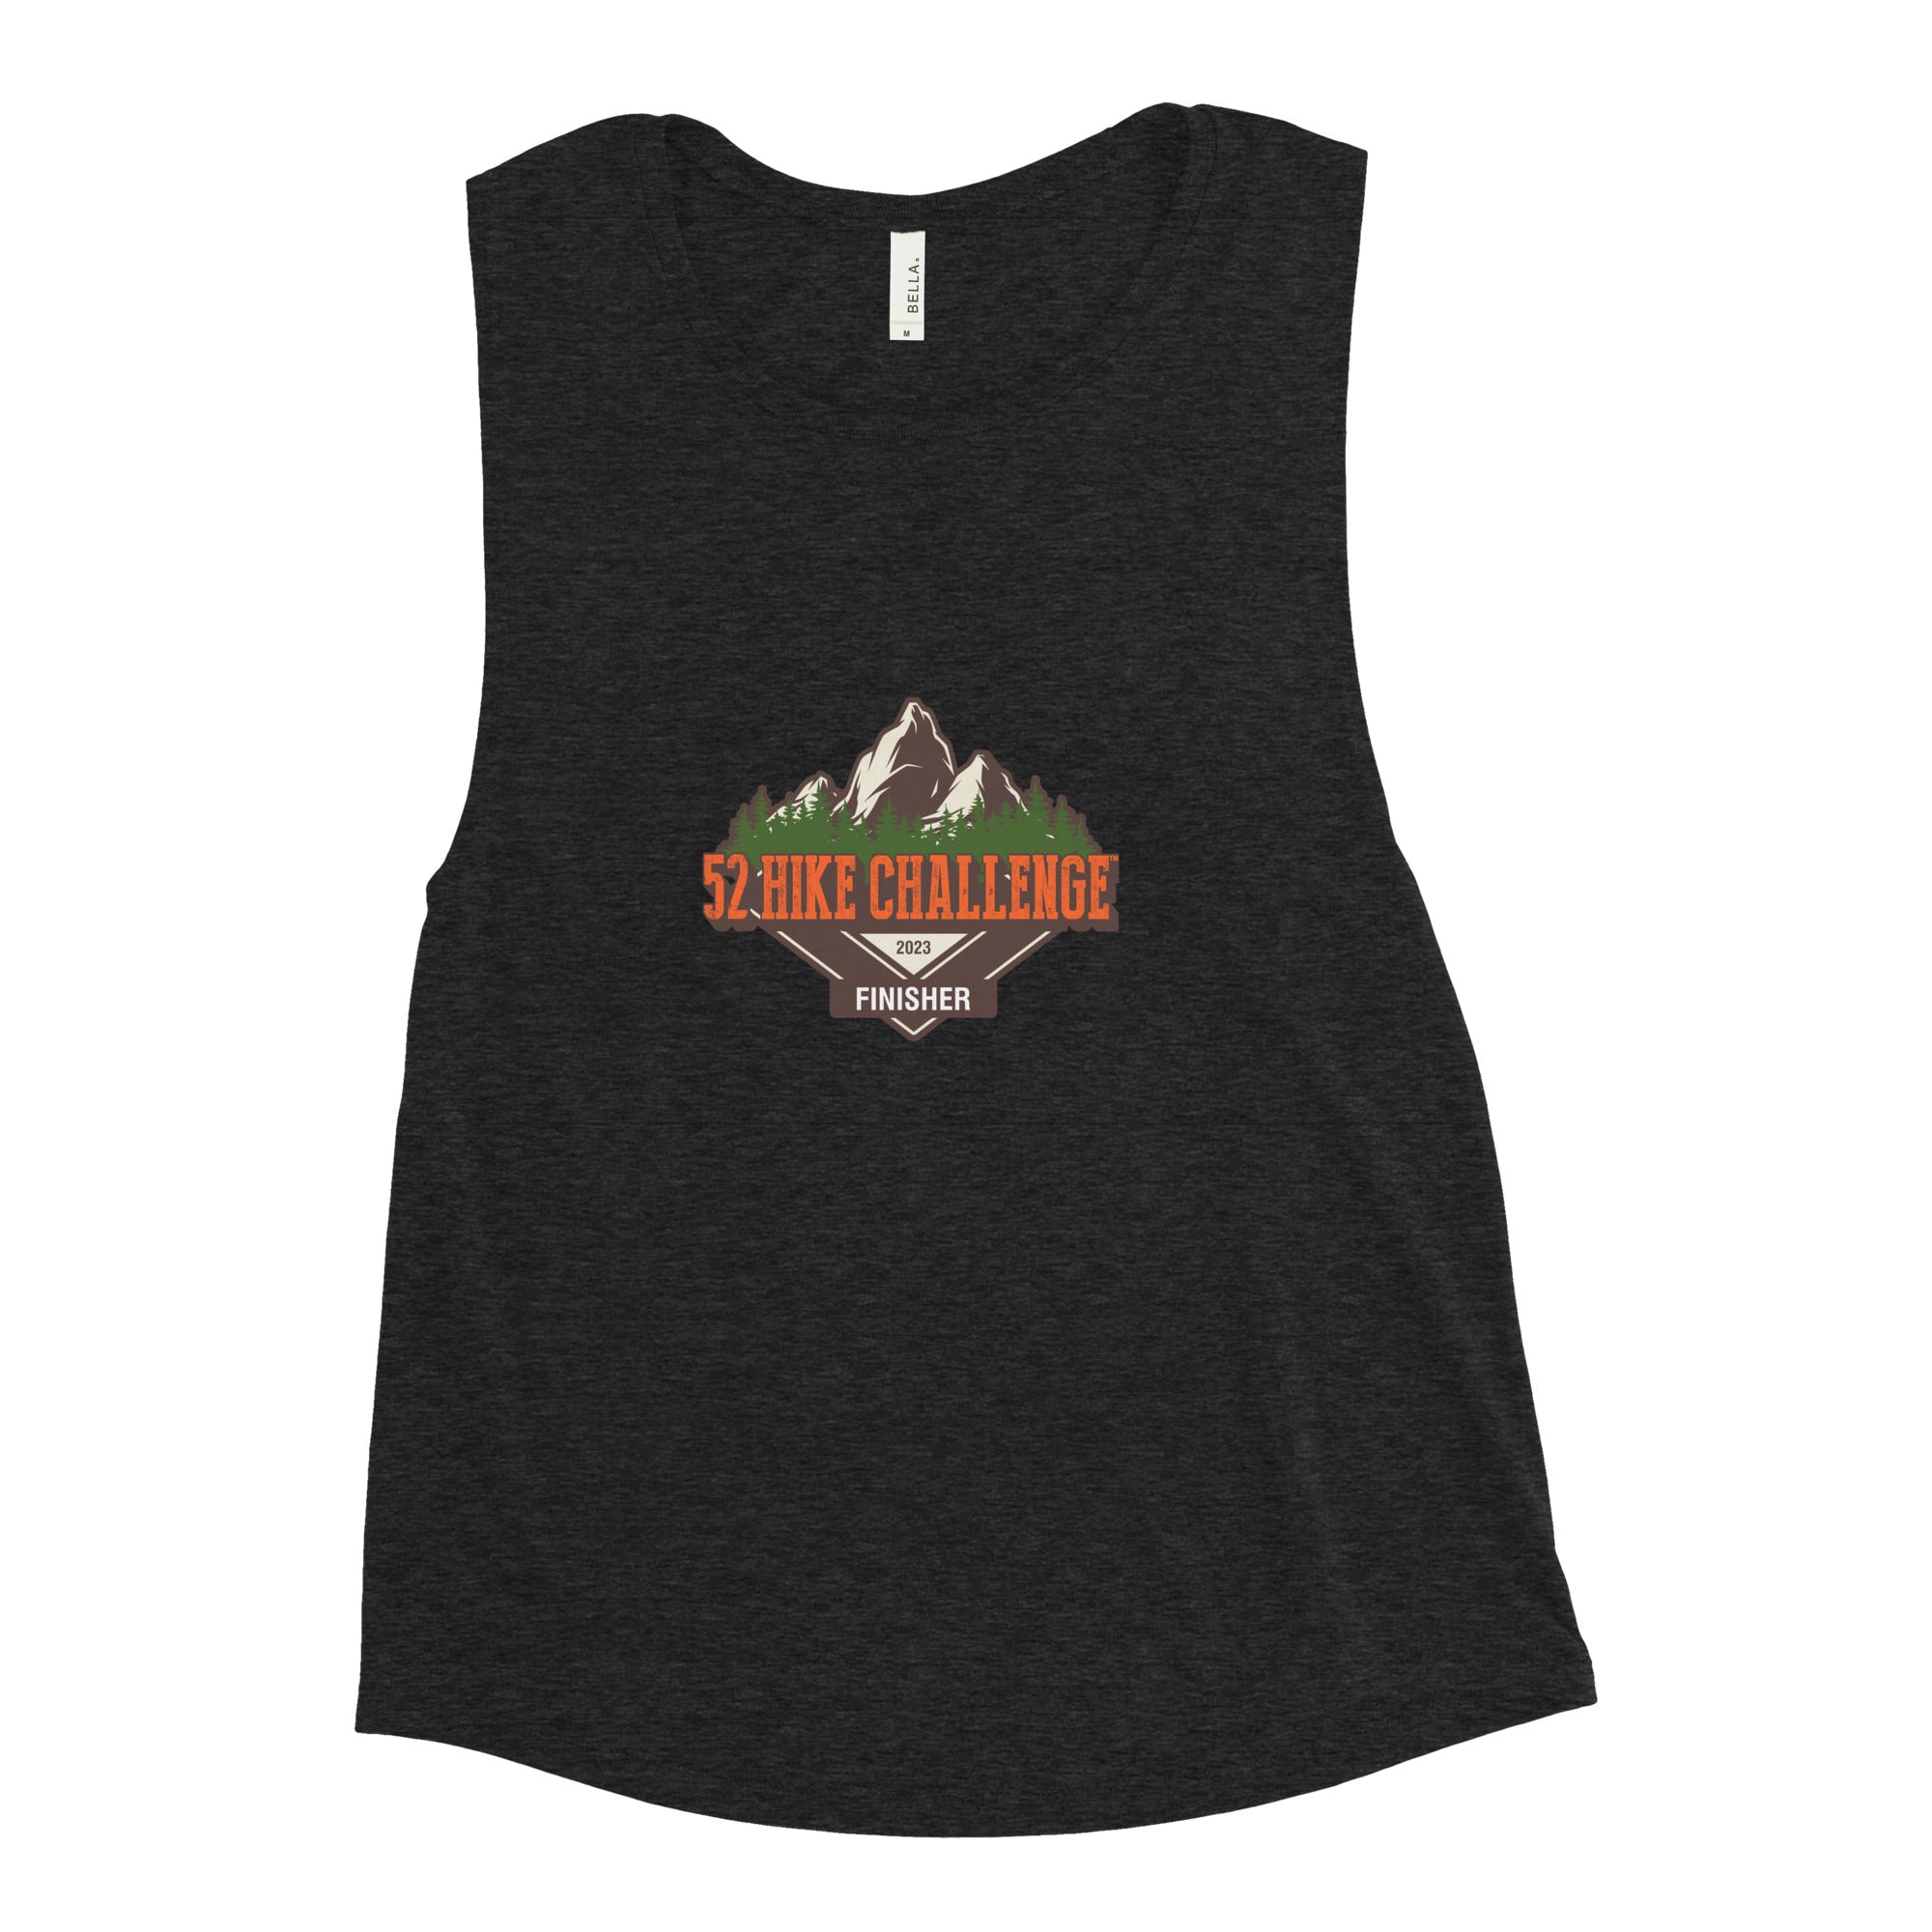 52 Hike Challenge 2023 Finisher Ladies’ Muscle Tank